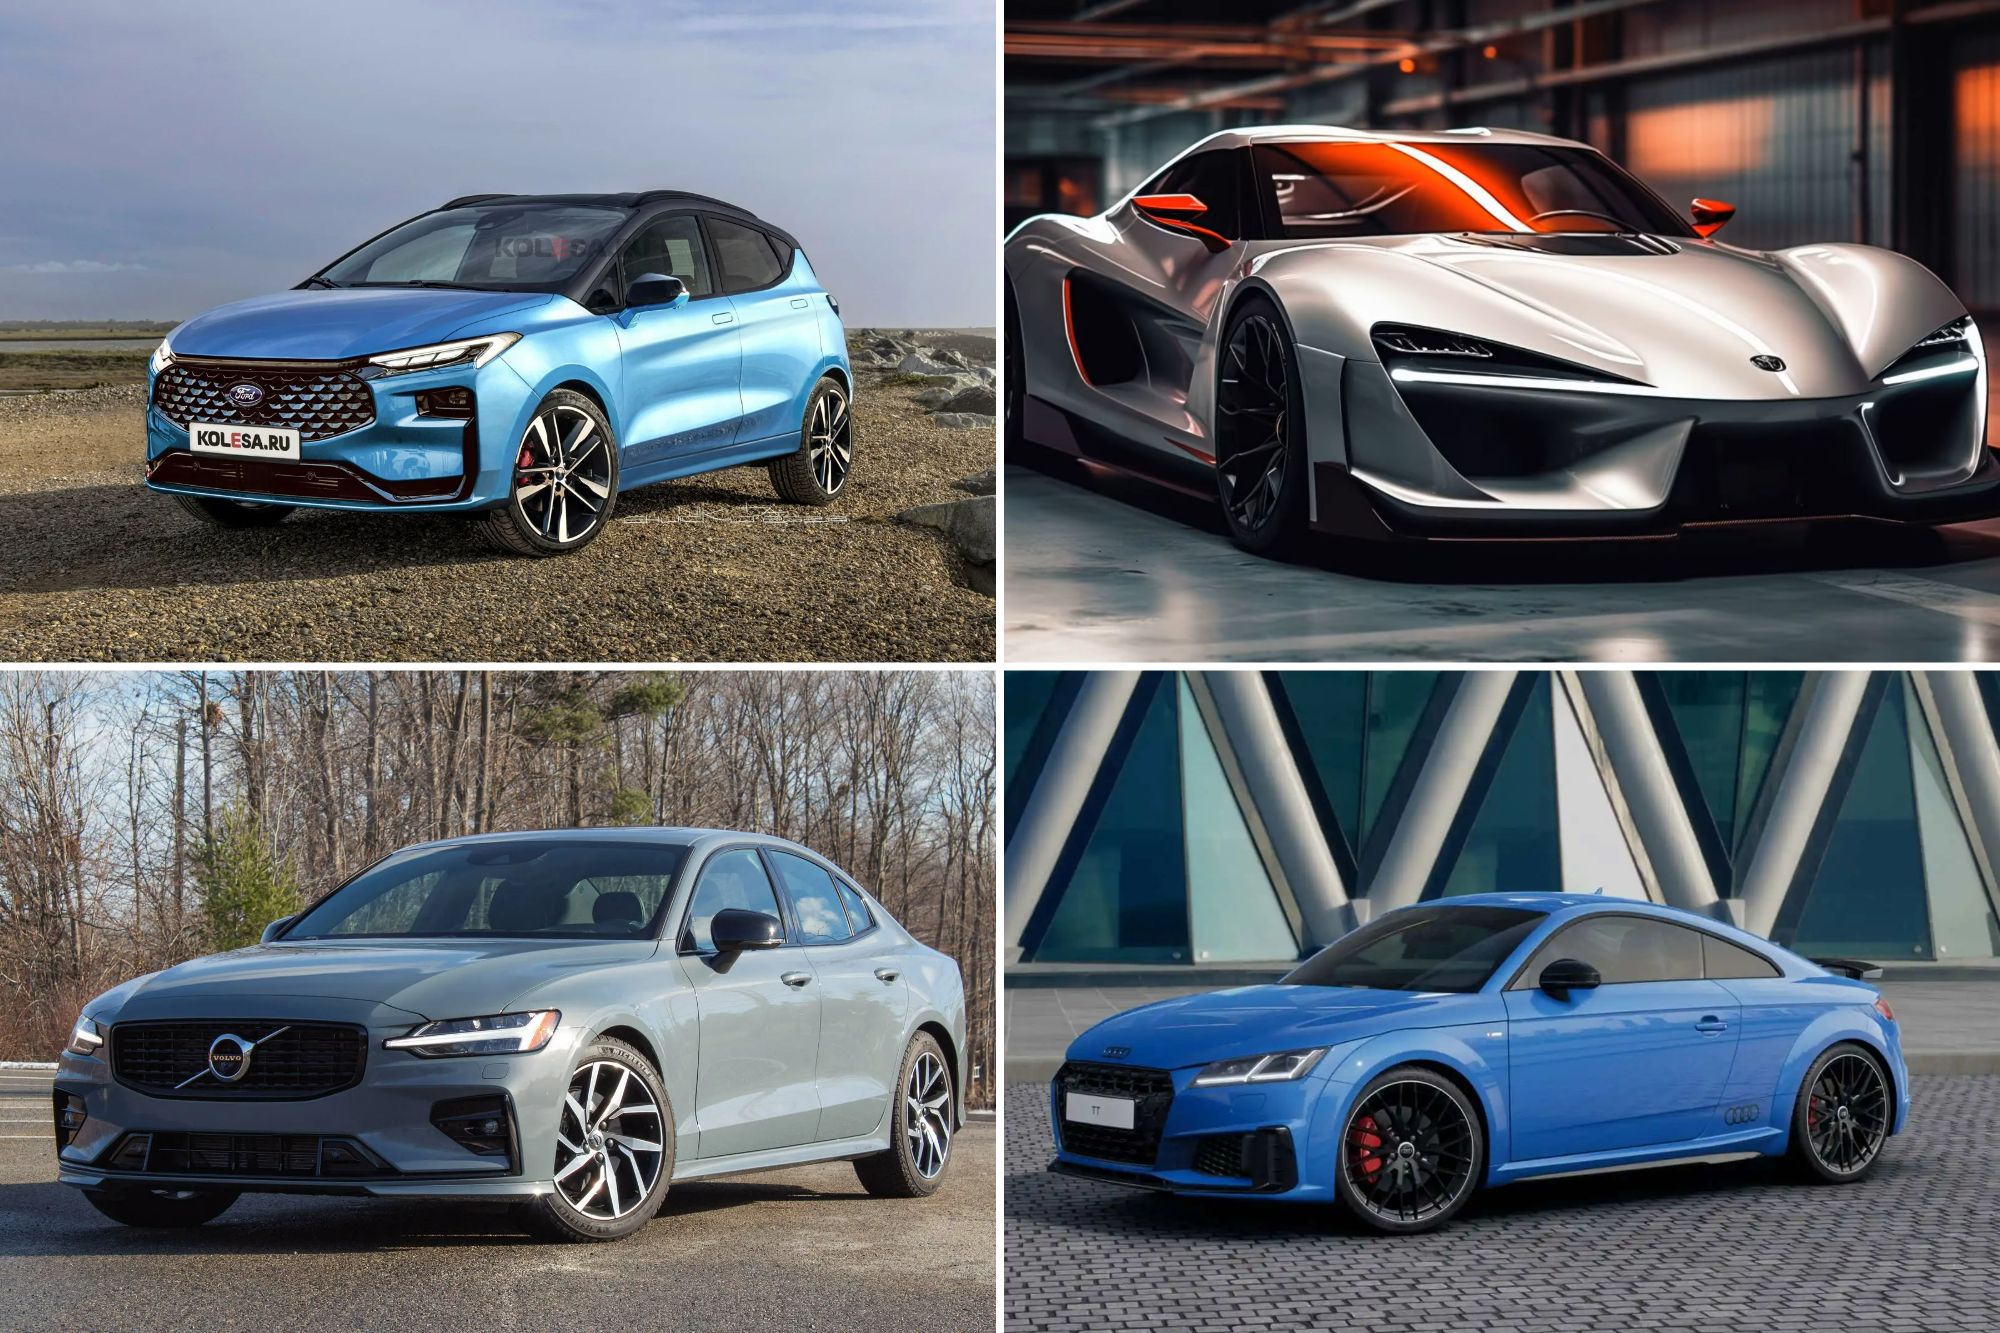 There is a whole range of performance cars that you can pick up for under £3,000